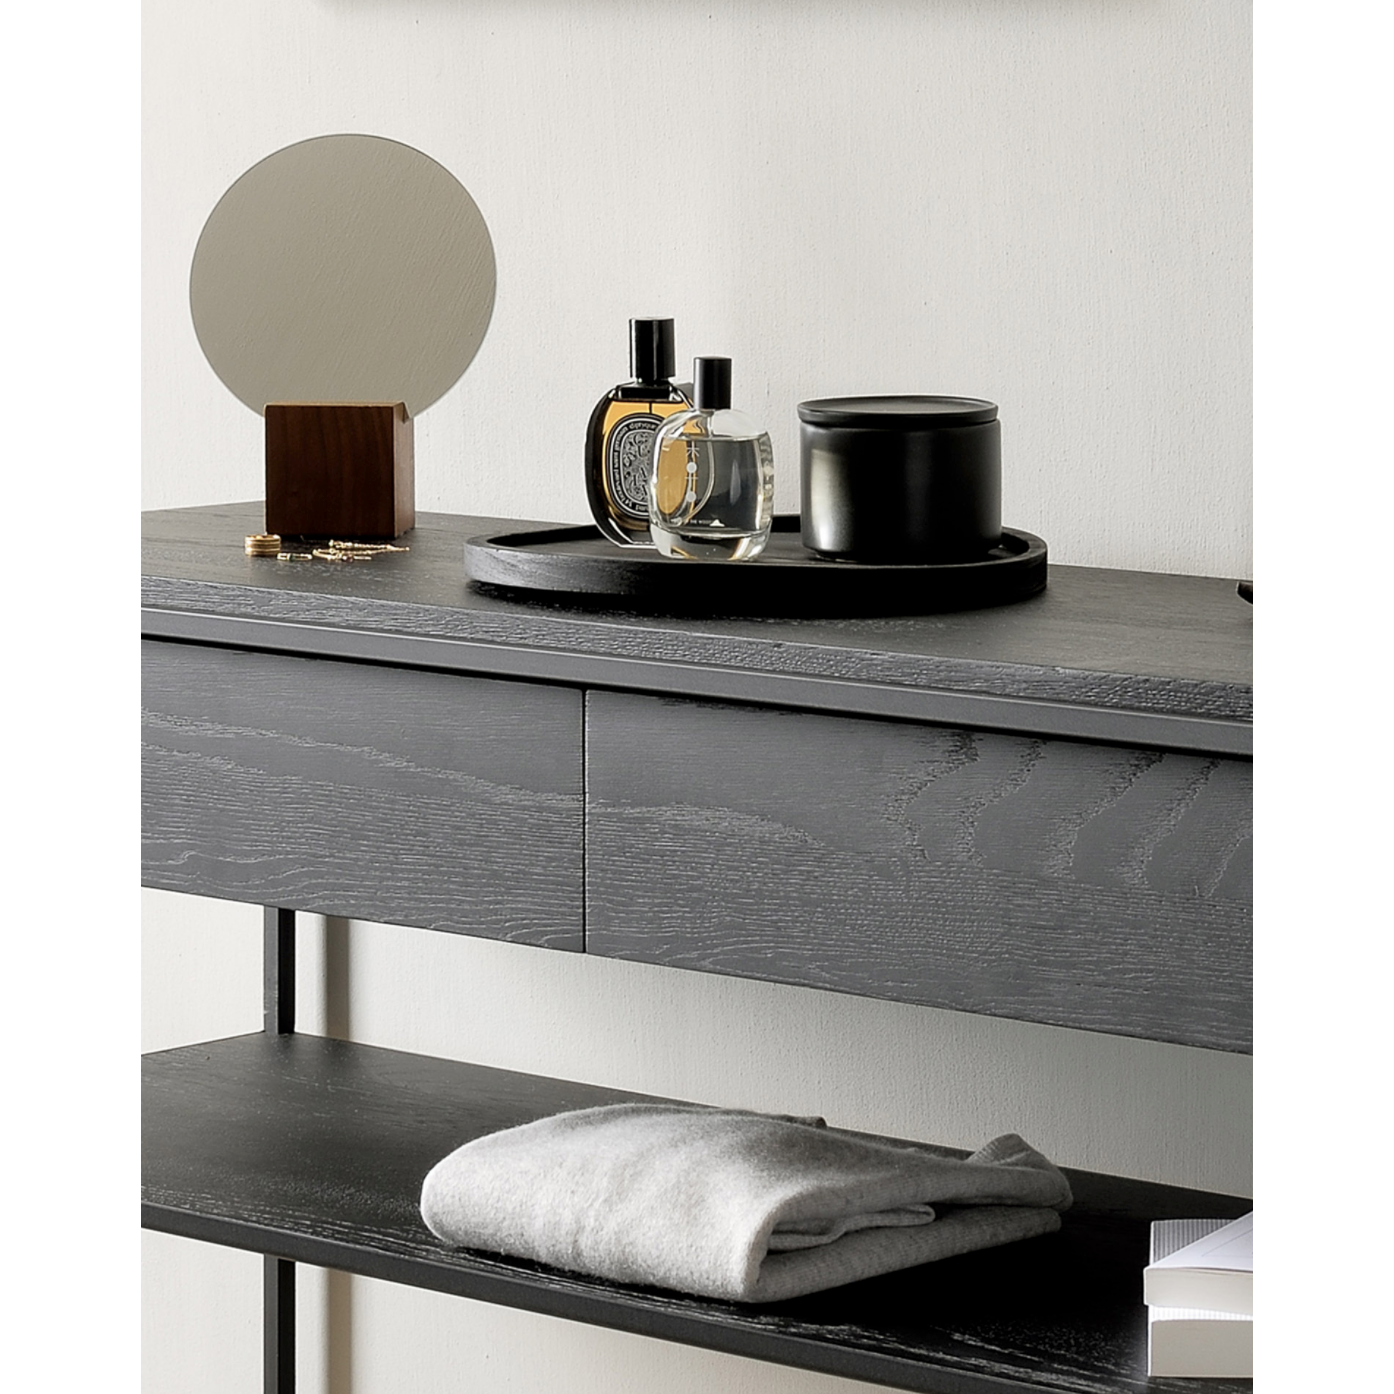 Balance and function come together in the Monolit console table. This simple, sleek table includes storage and we LOVE hidden storage! Dress up your living room or office with a piece that is both functional and stylish!  Dimensions: 48.5"w x 16"d x 33.5"h  Weight: 77 lbs  Material: Oak, 100% solid wood Finish: Varnished